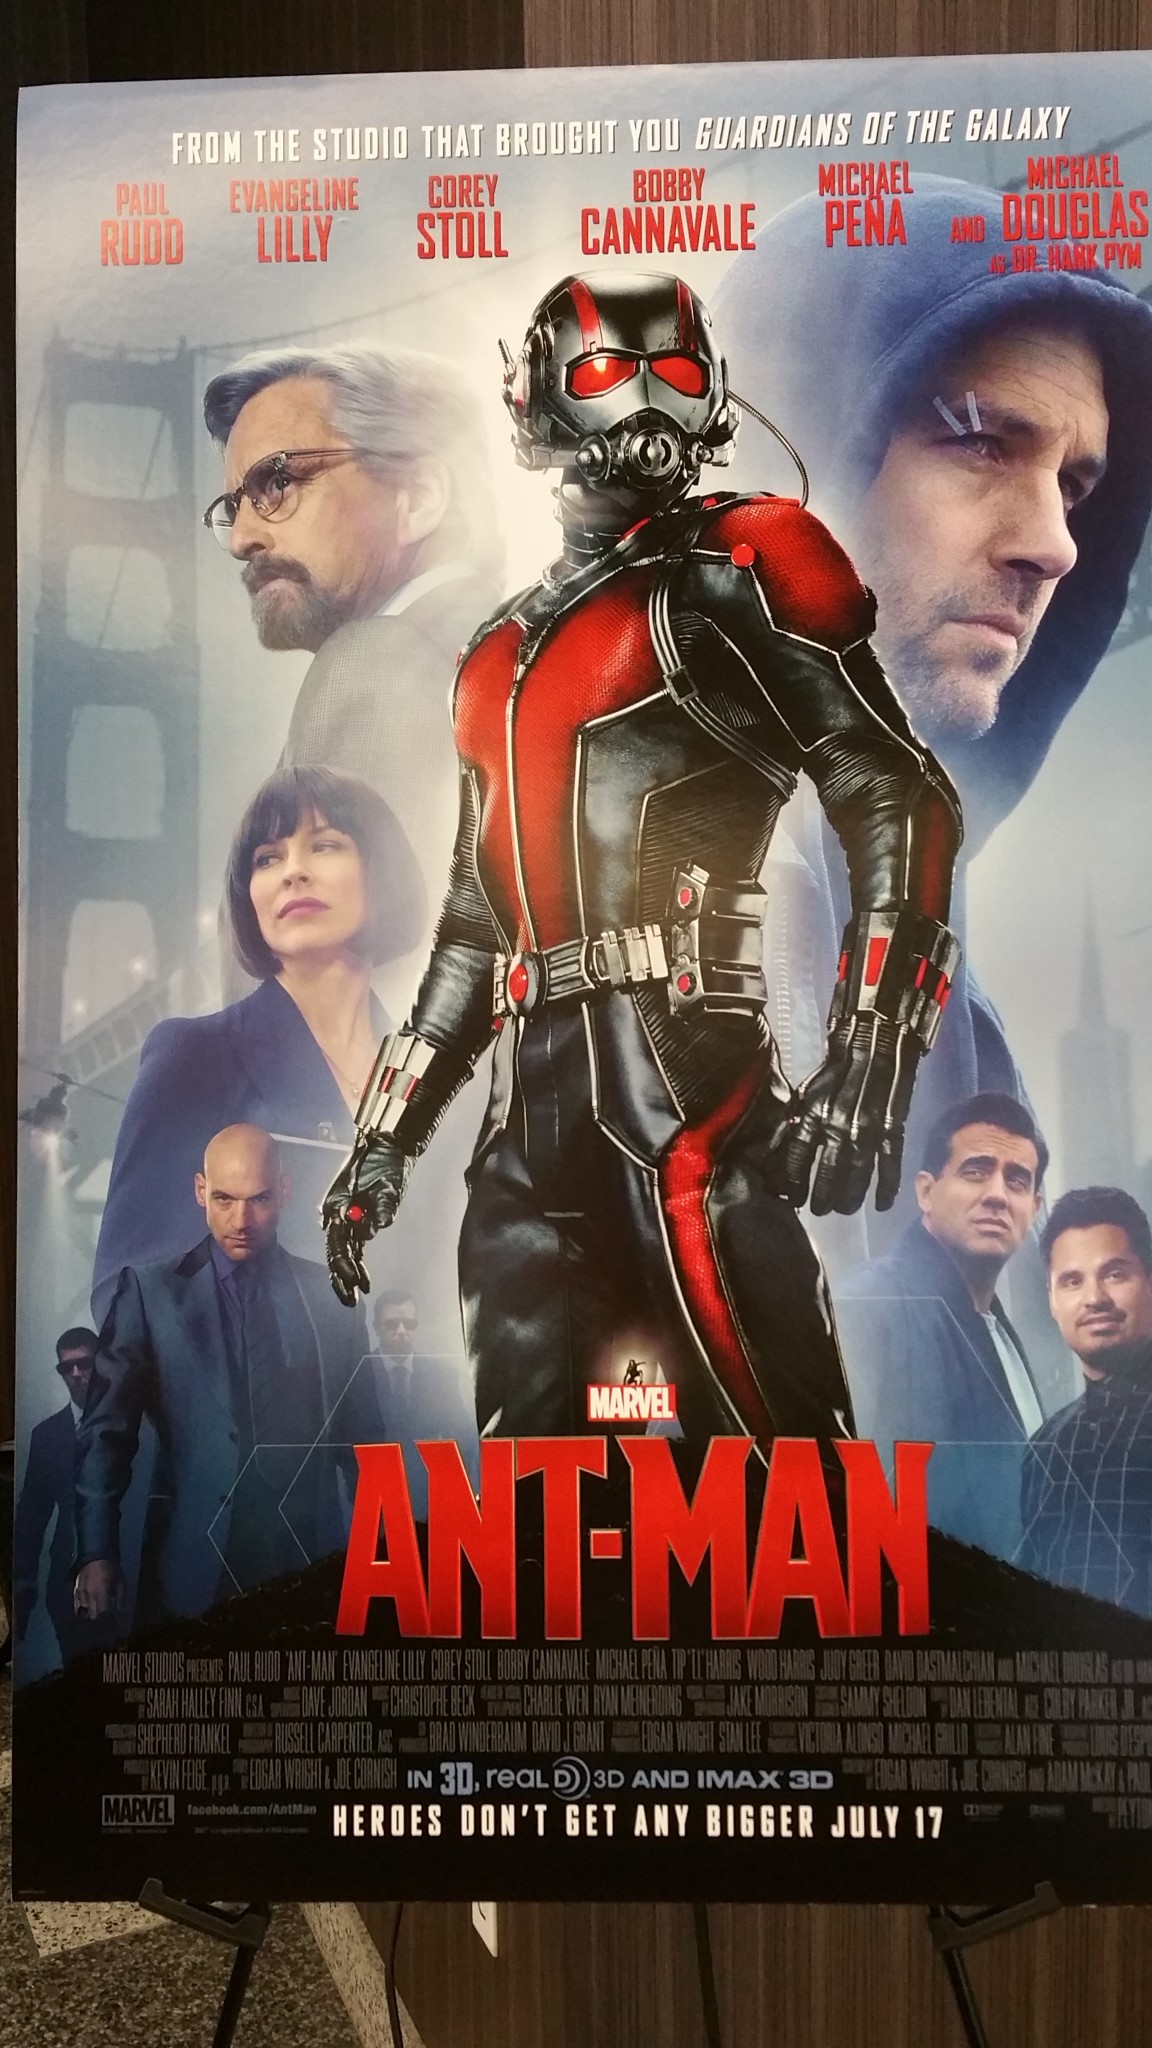 The Casting of Marvel’s Ant Man